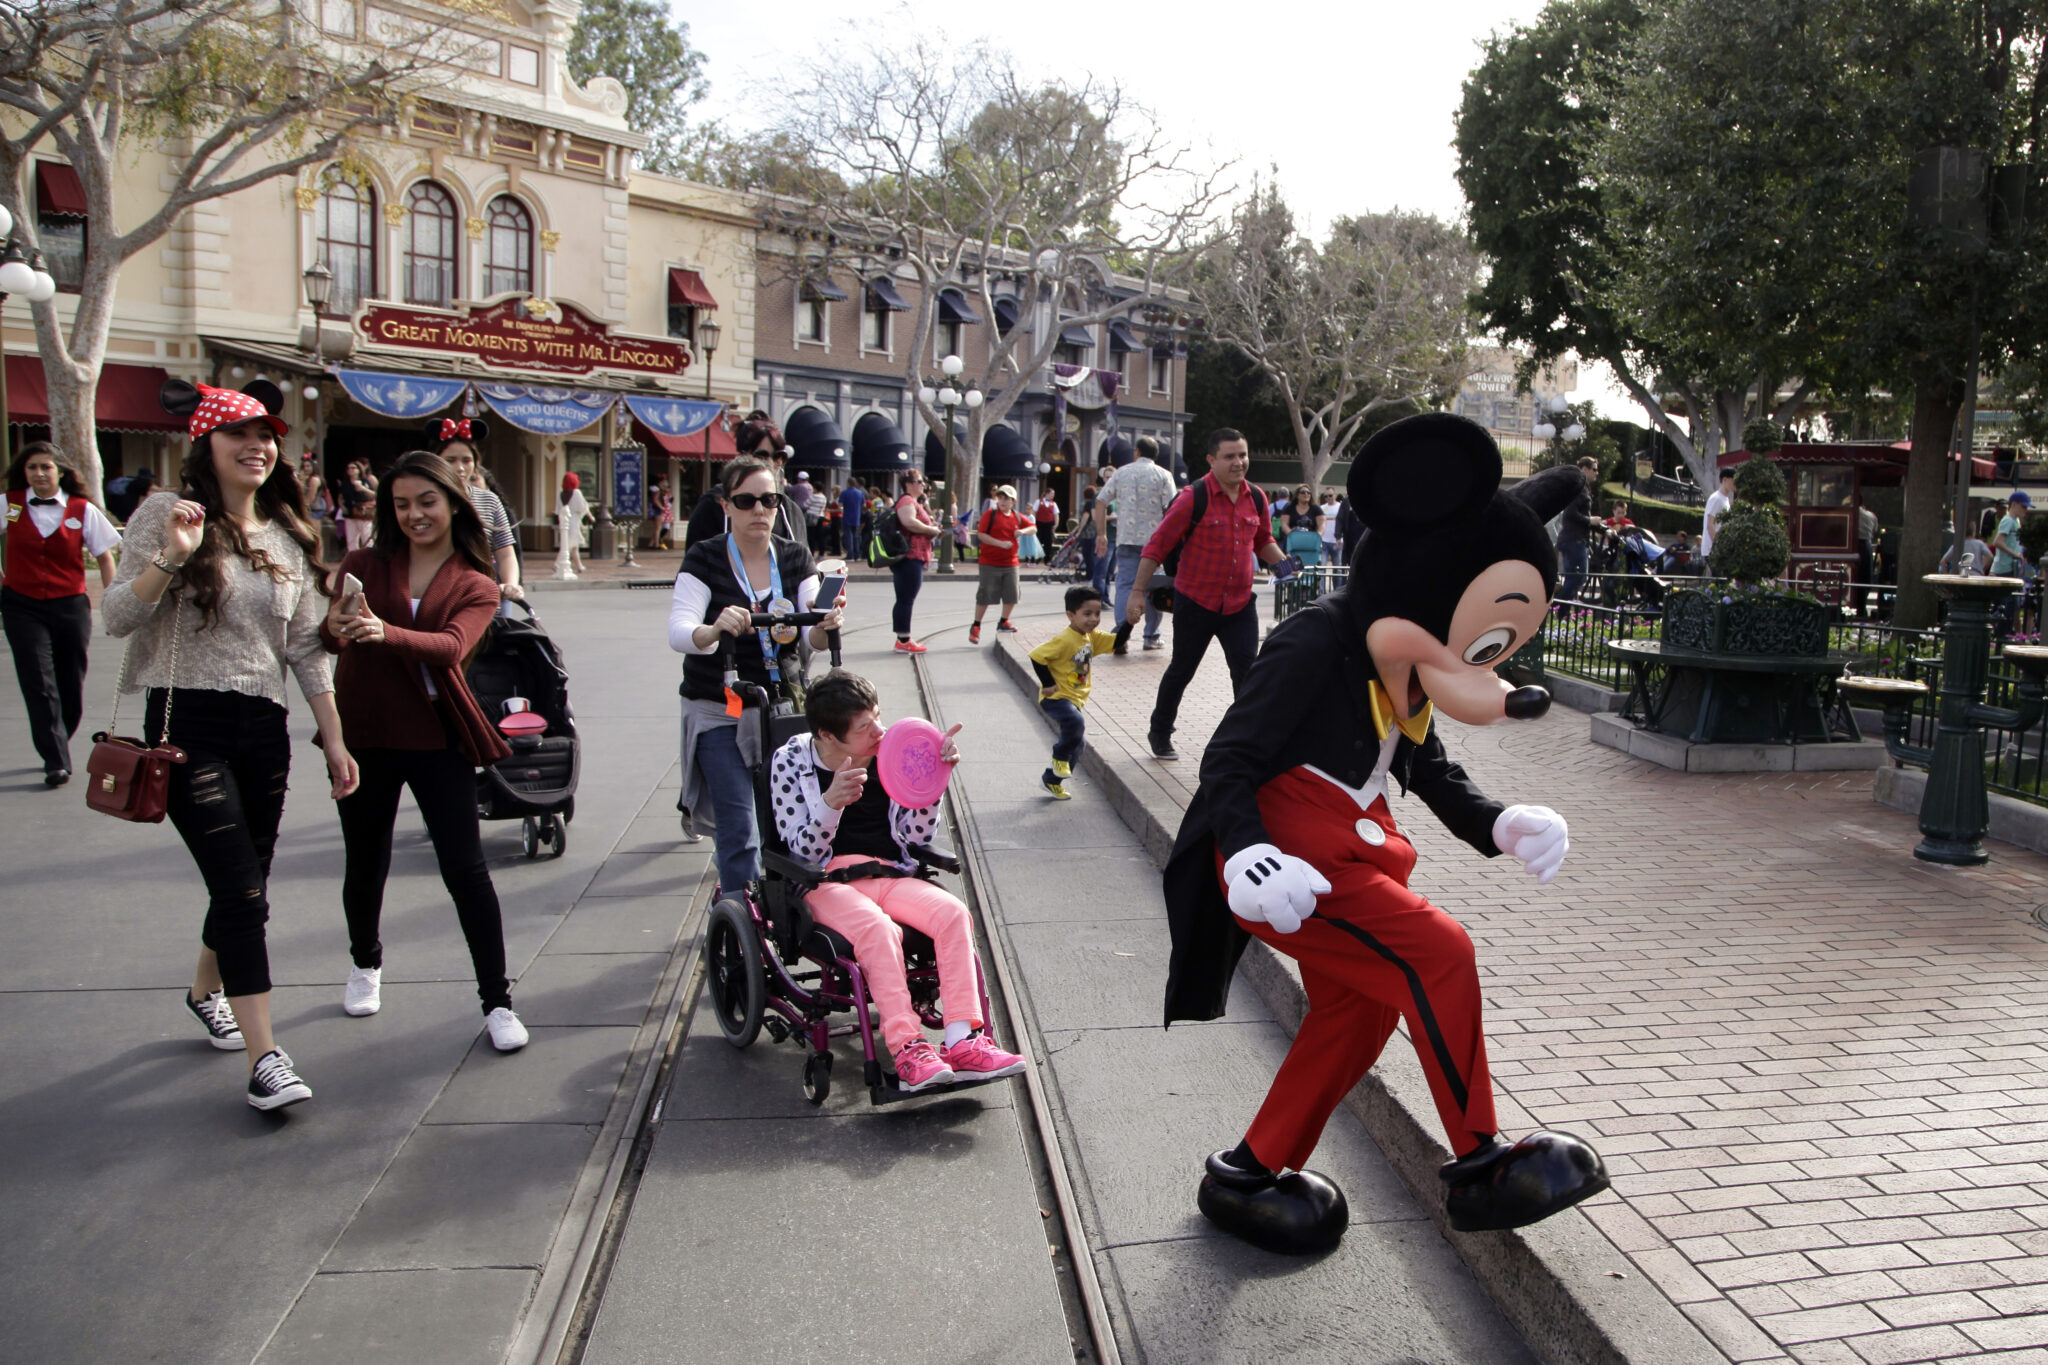 Disneyland character performers vote to join labor union